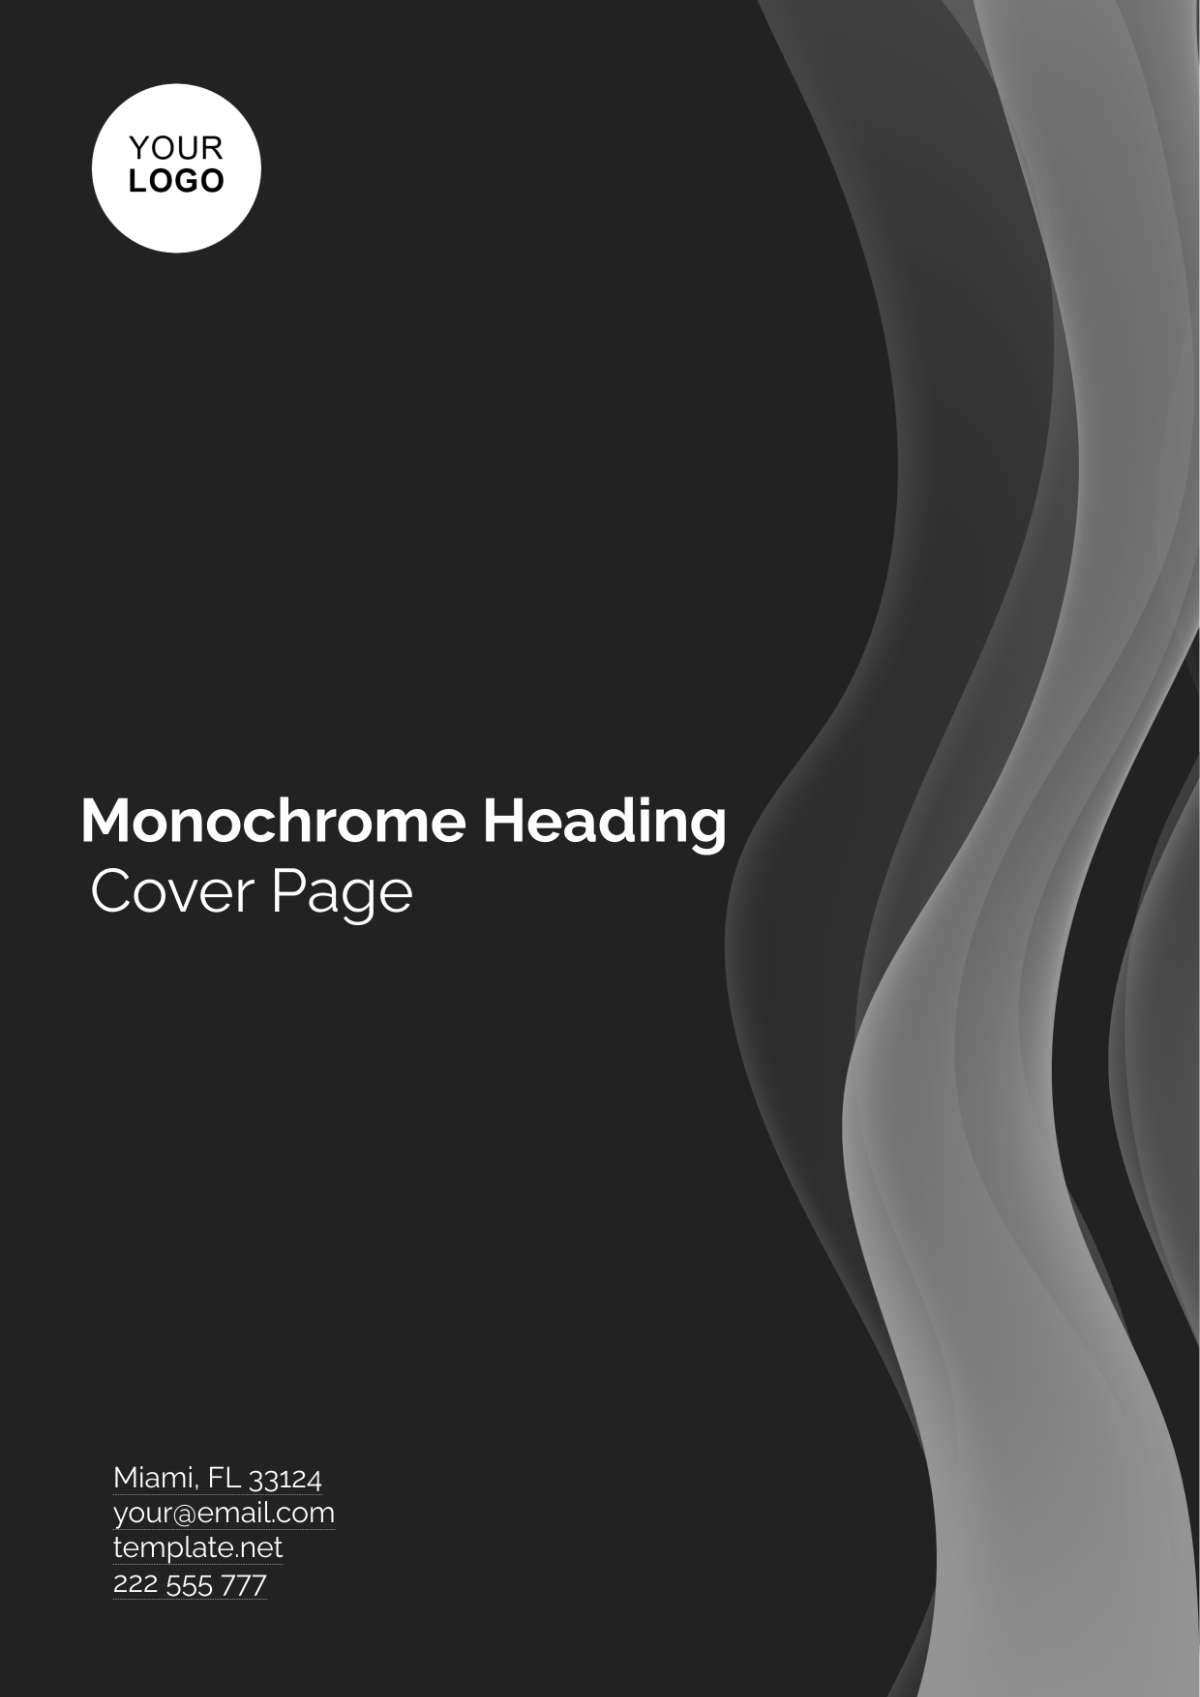 Monochrome Heading Cover Page